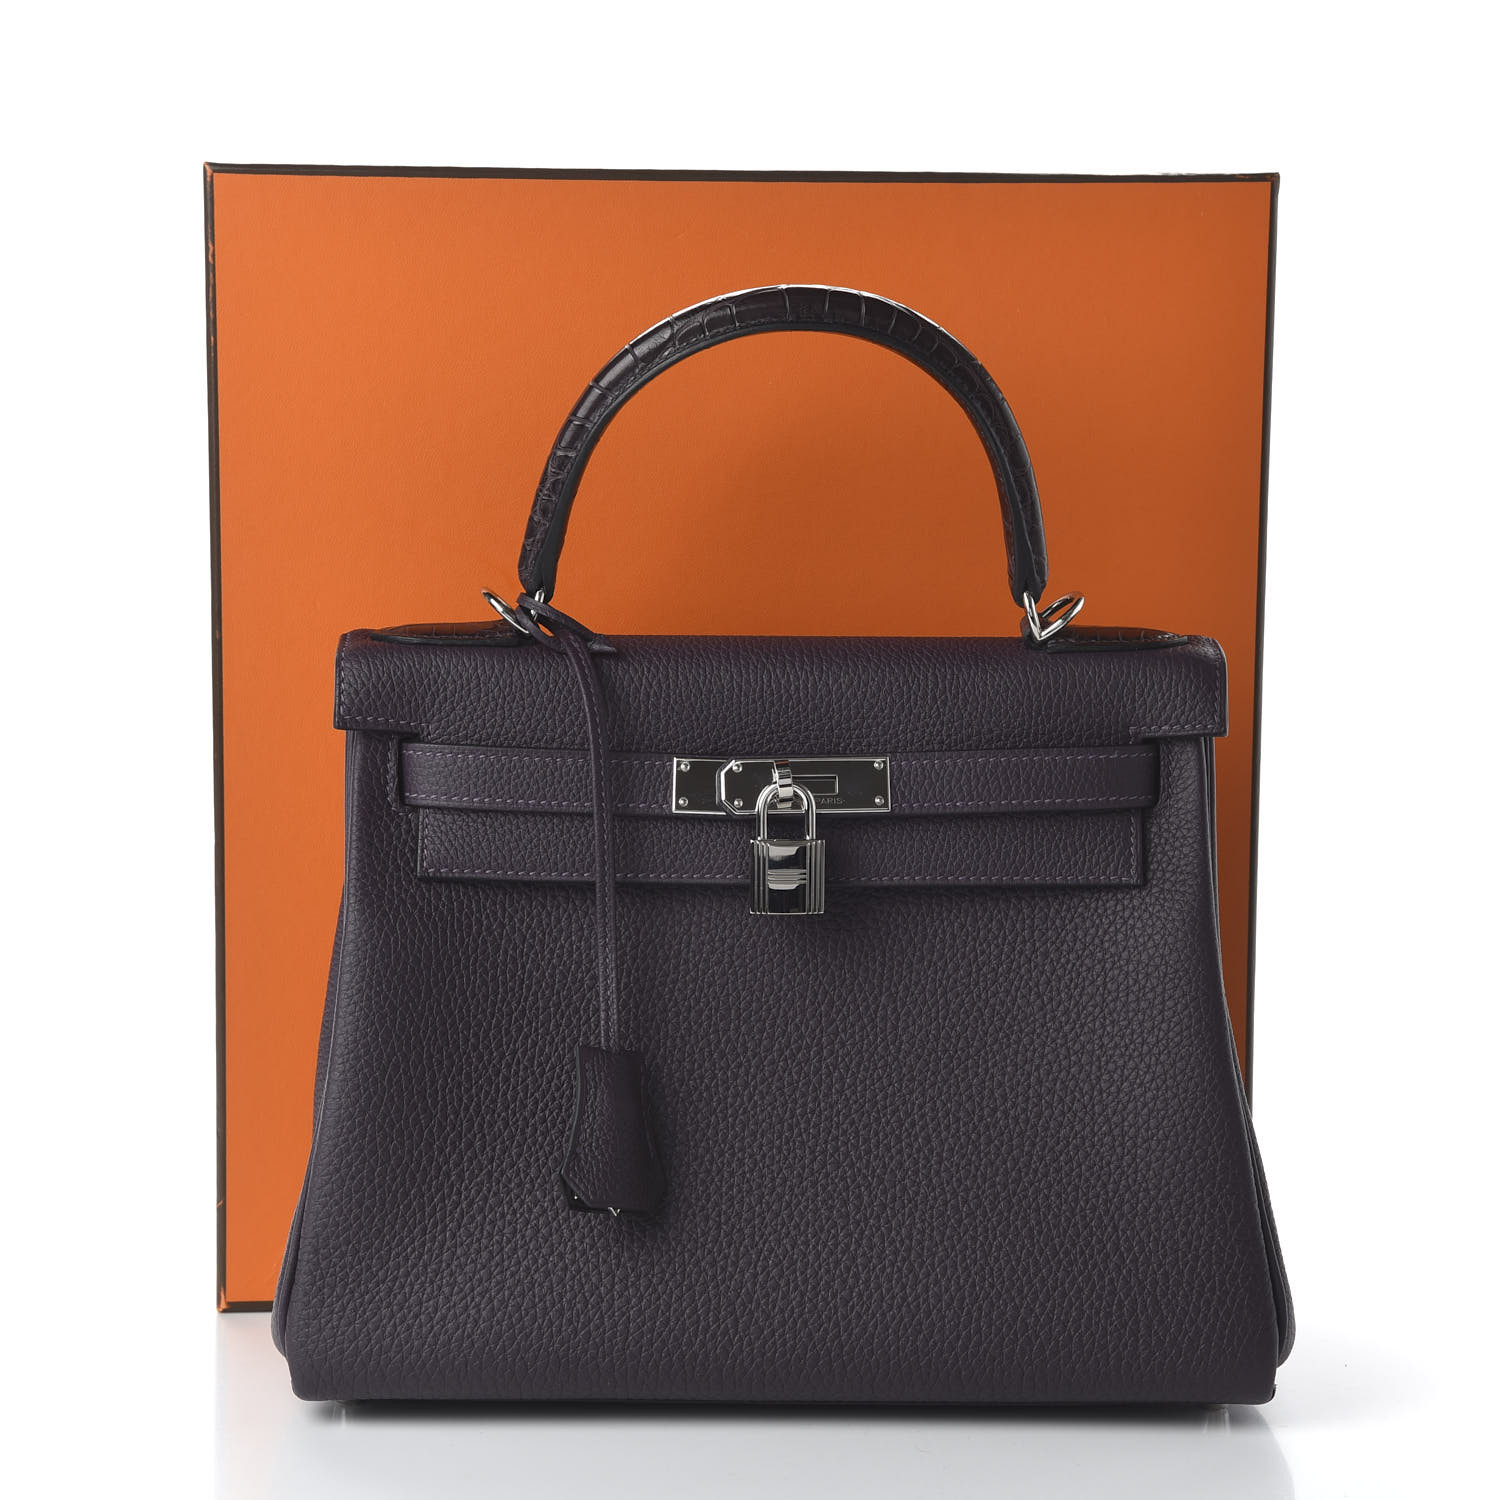 kelly touch hermes